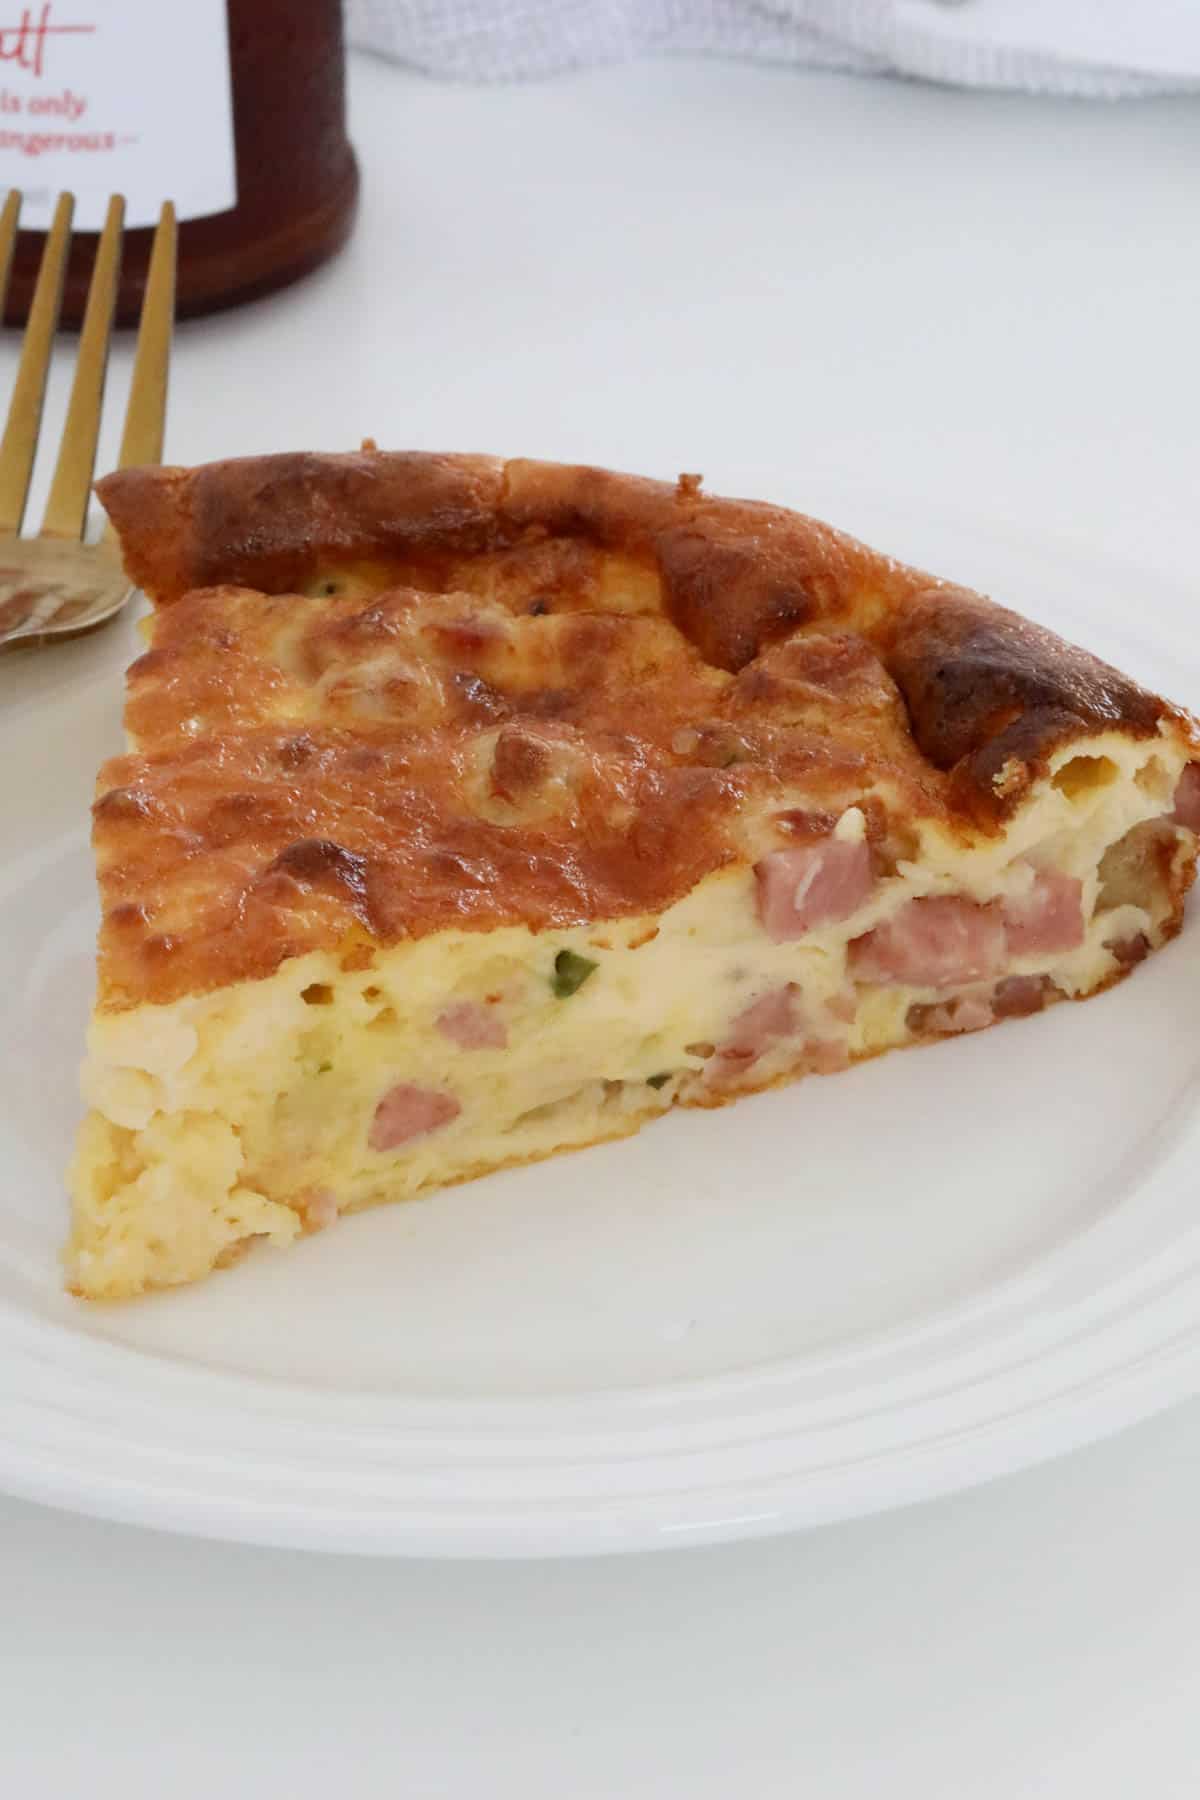 A triangle of egg quiche showing a filling of bacon and chives, served on a white plate.